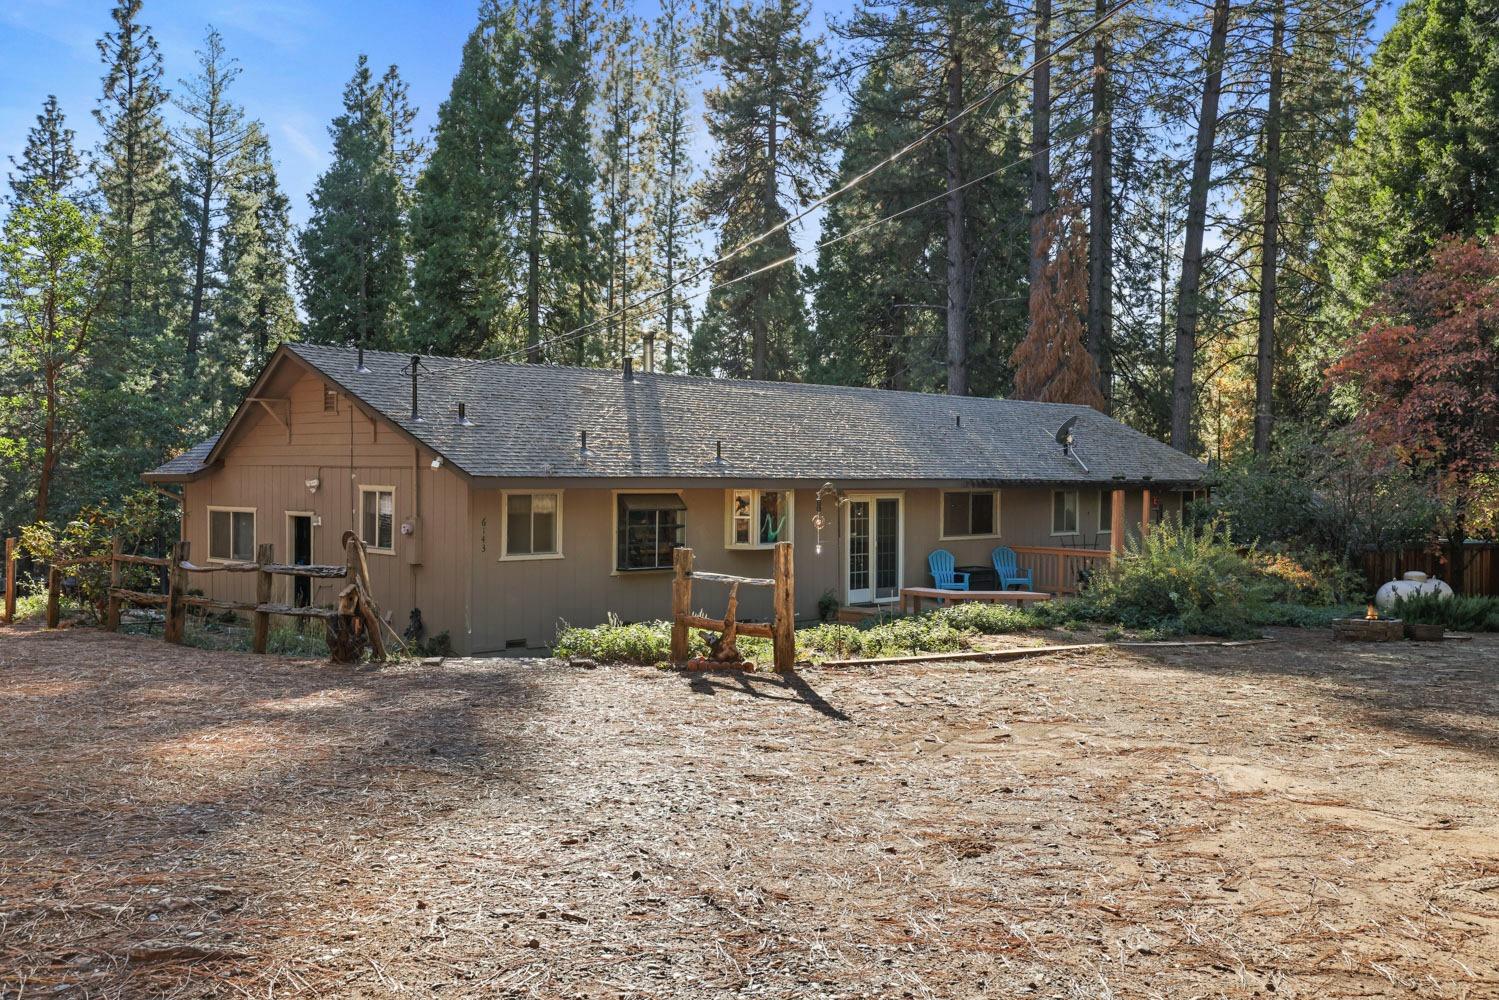 Photo of 6143 Altamont Ln in Placerville, CA